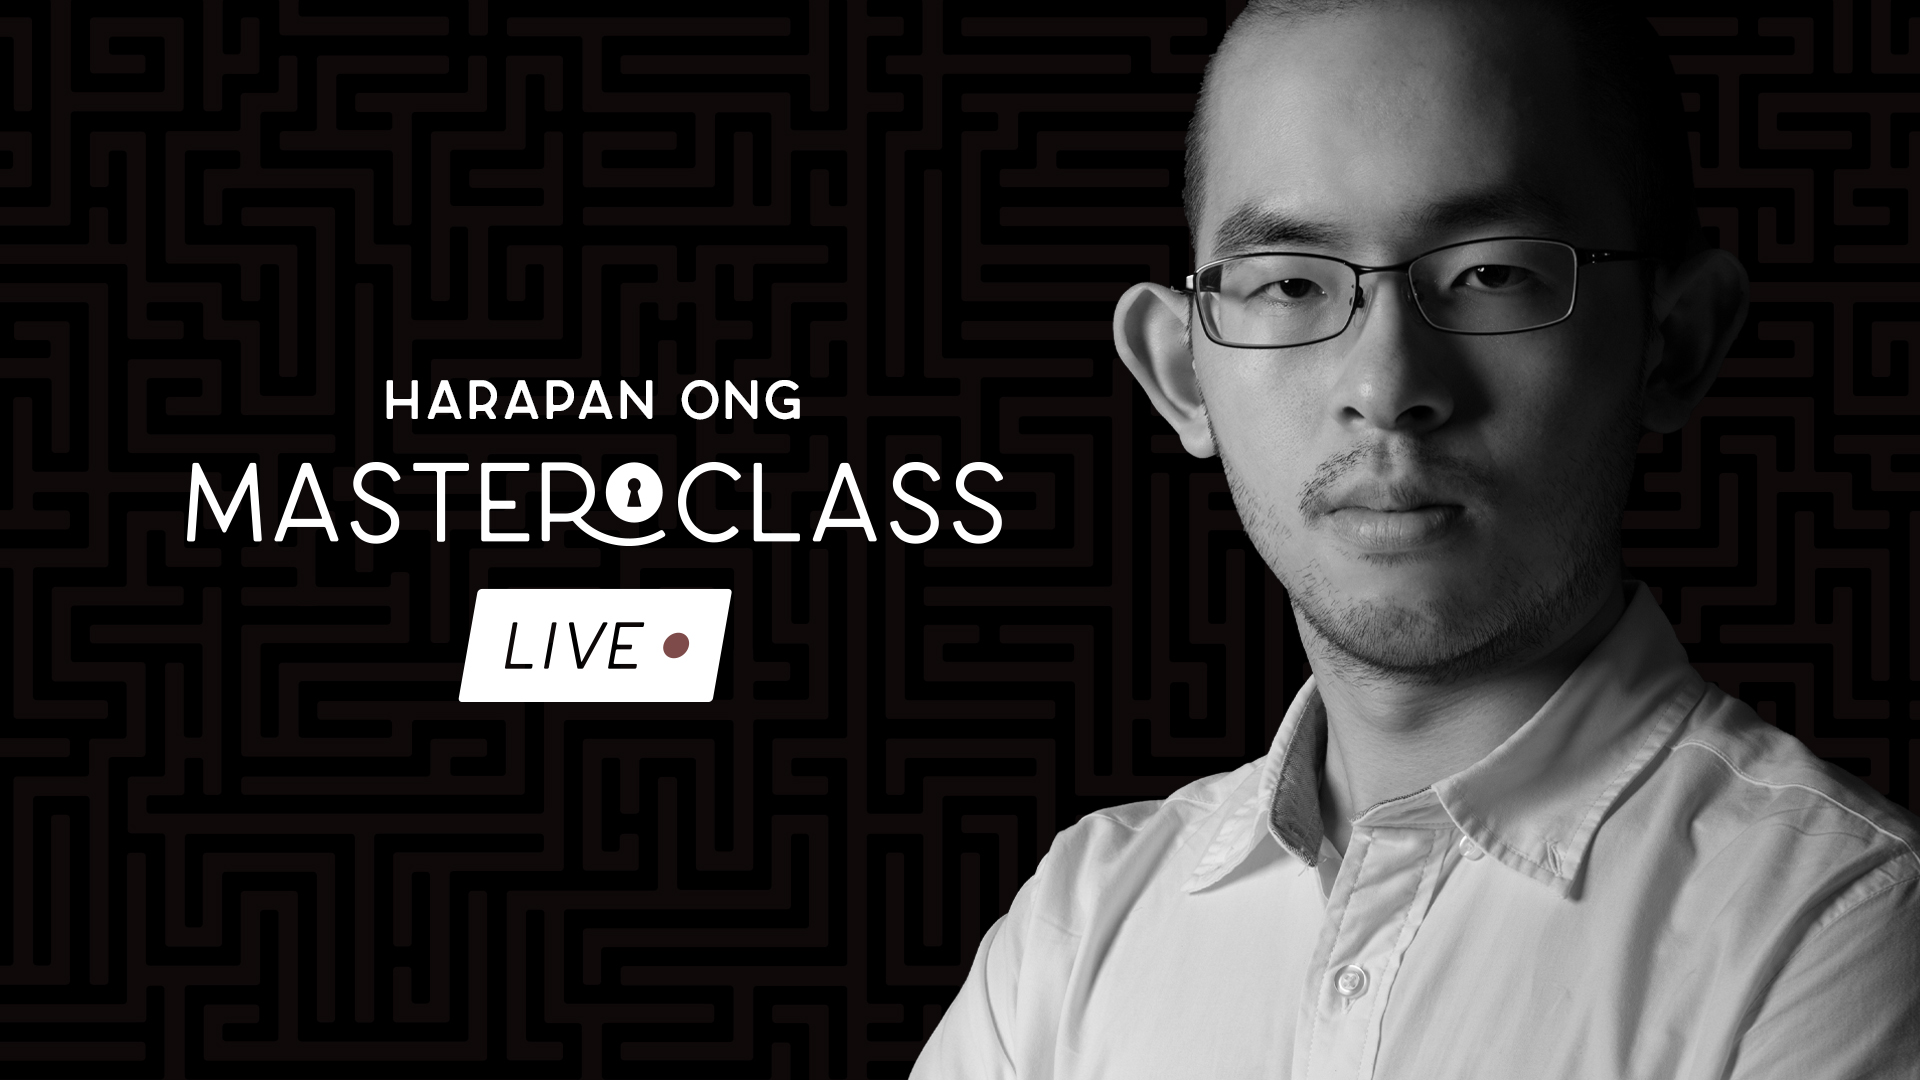 Harapan Ong - Masterclass Live Lecture (Week 2) (MP4 Video Download 1080p FullHD Quality)